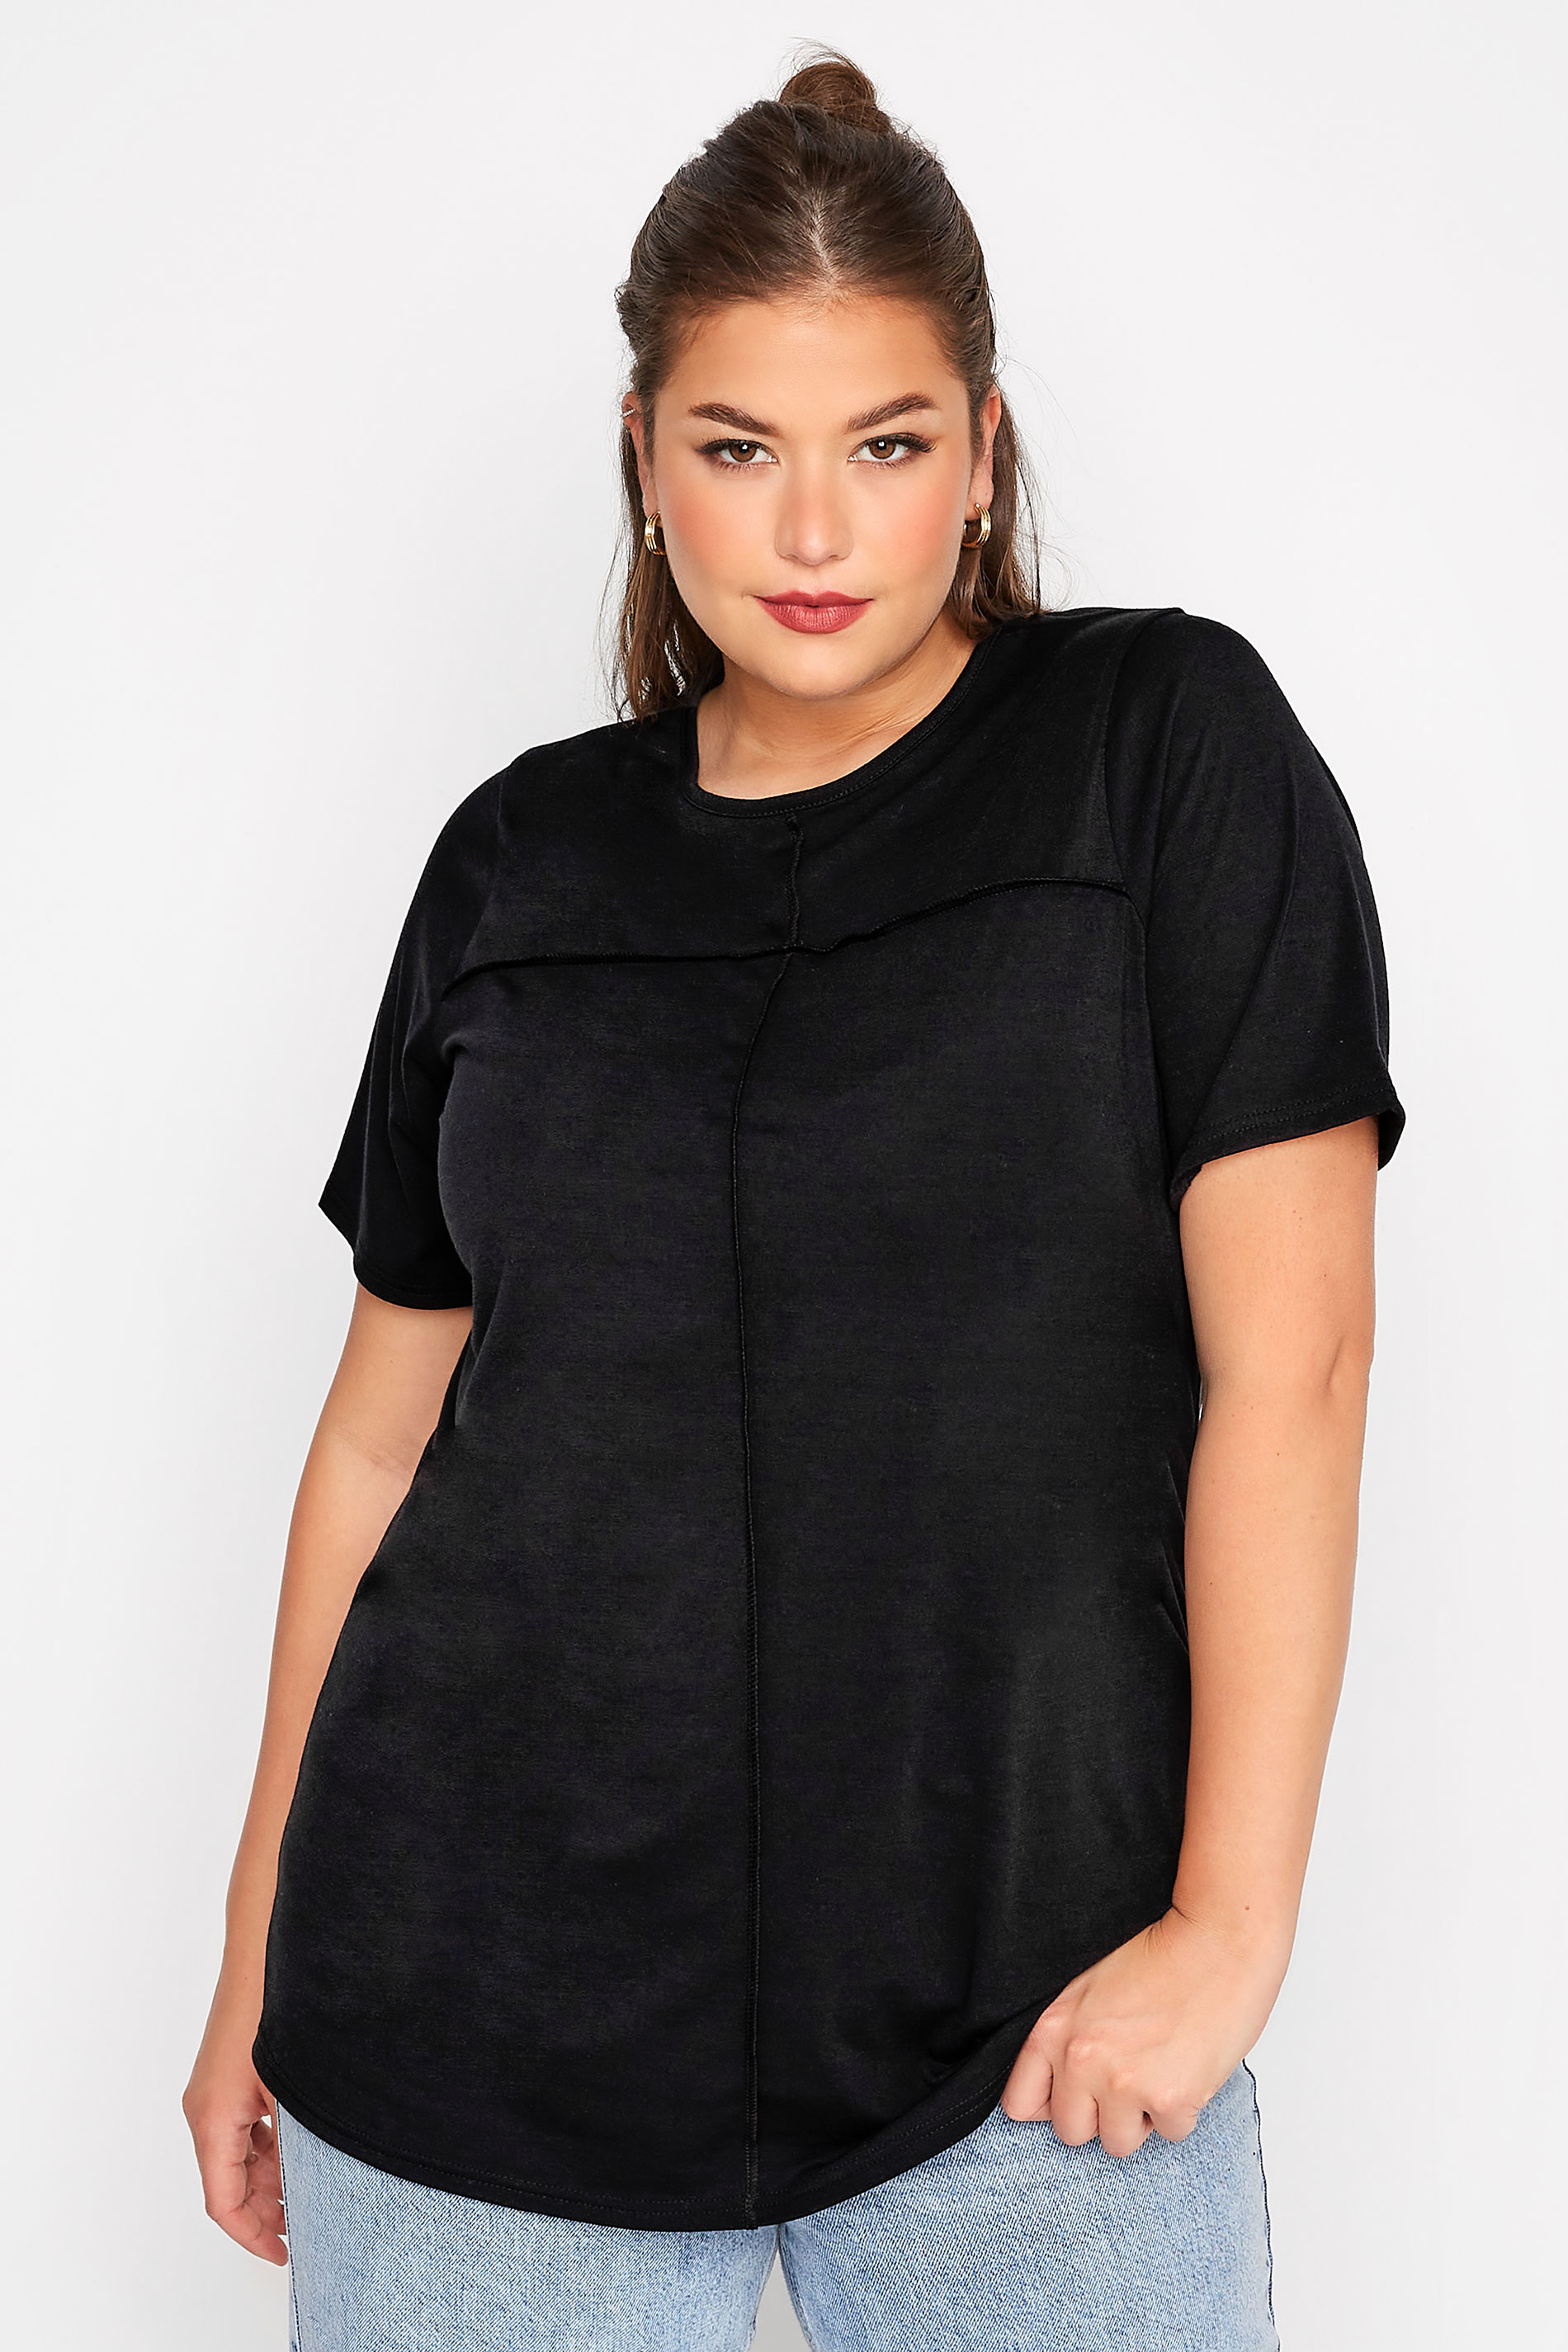 LIMITED COLLECTION Curve Black Exposed Seam T-Shirt_A.jpg